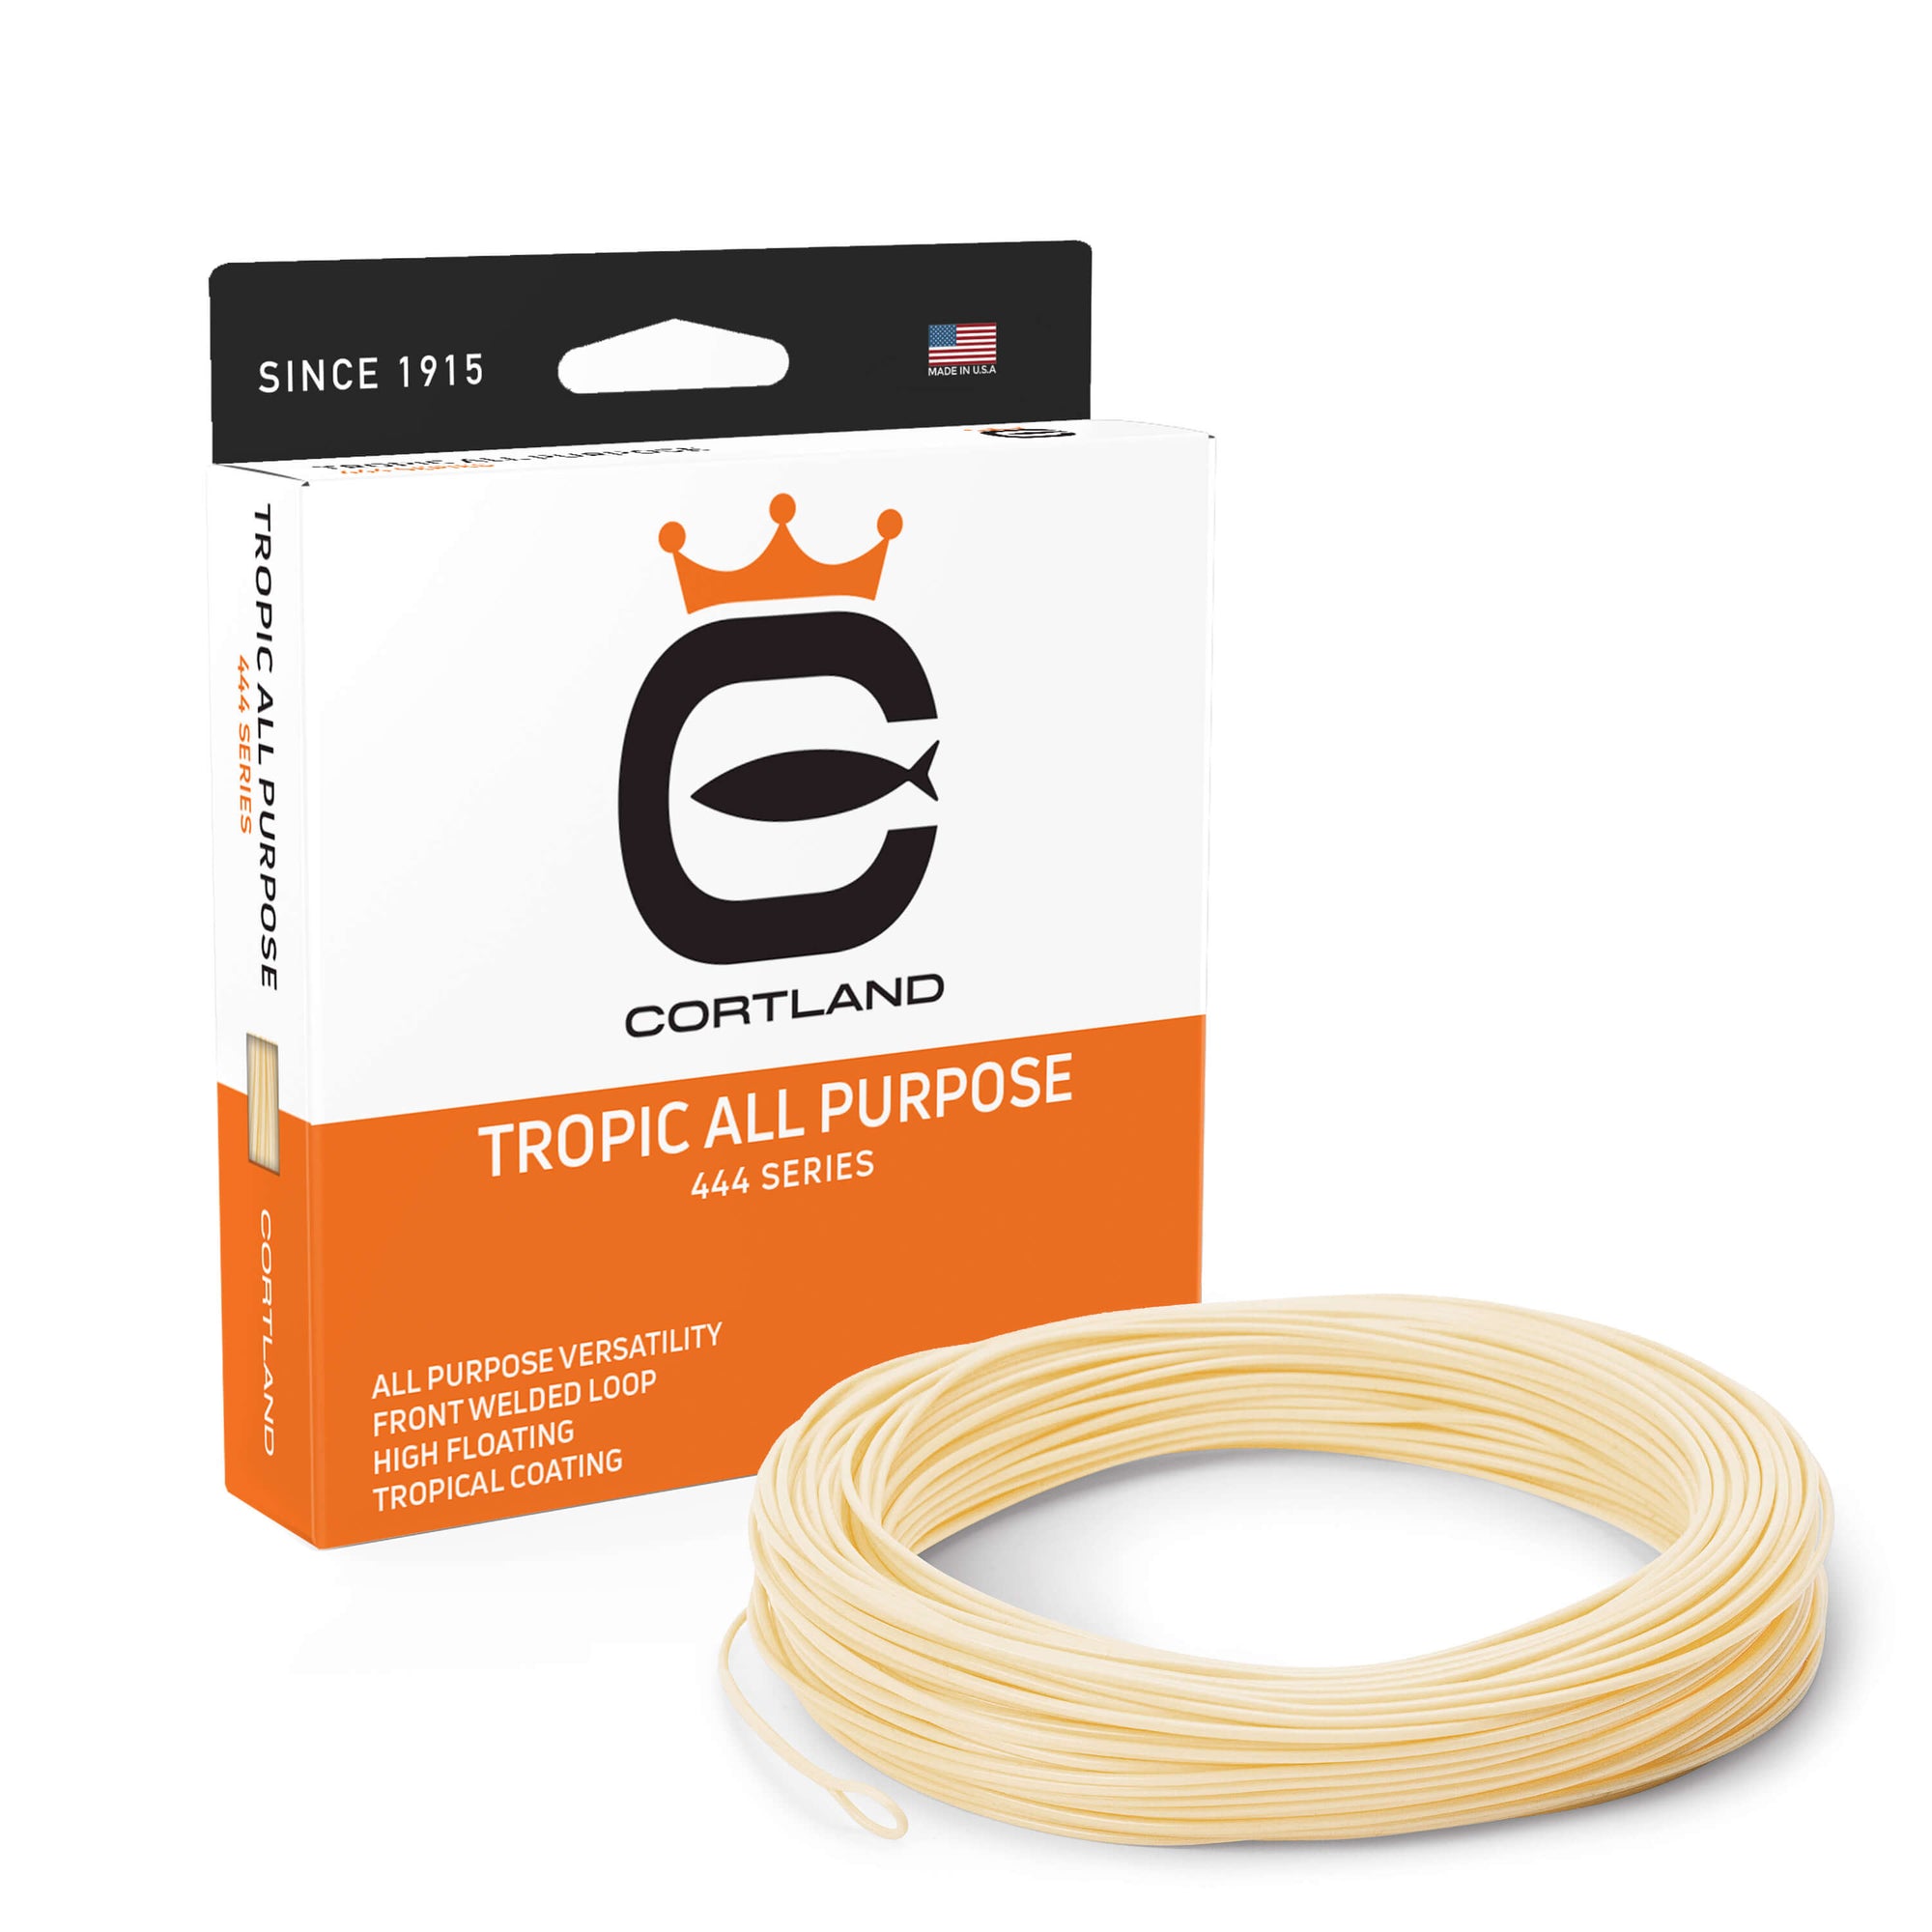 Tropic All Purpose Fly Line and Box. The coil is sand color. The box is orange at the bottom, white in the middle, and black at the top.